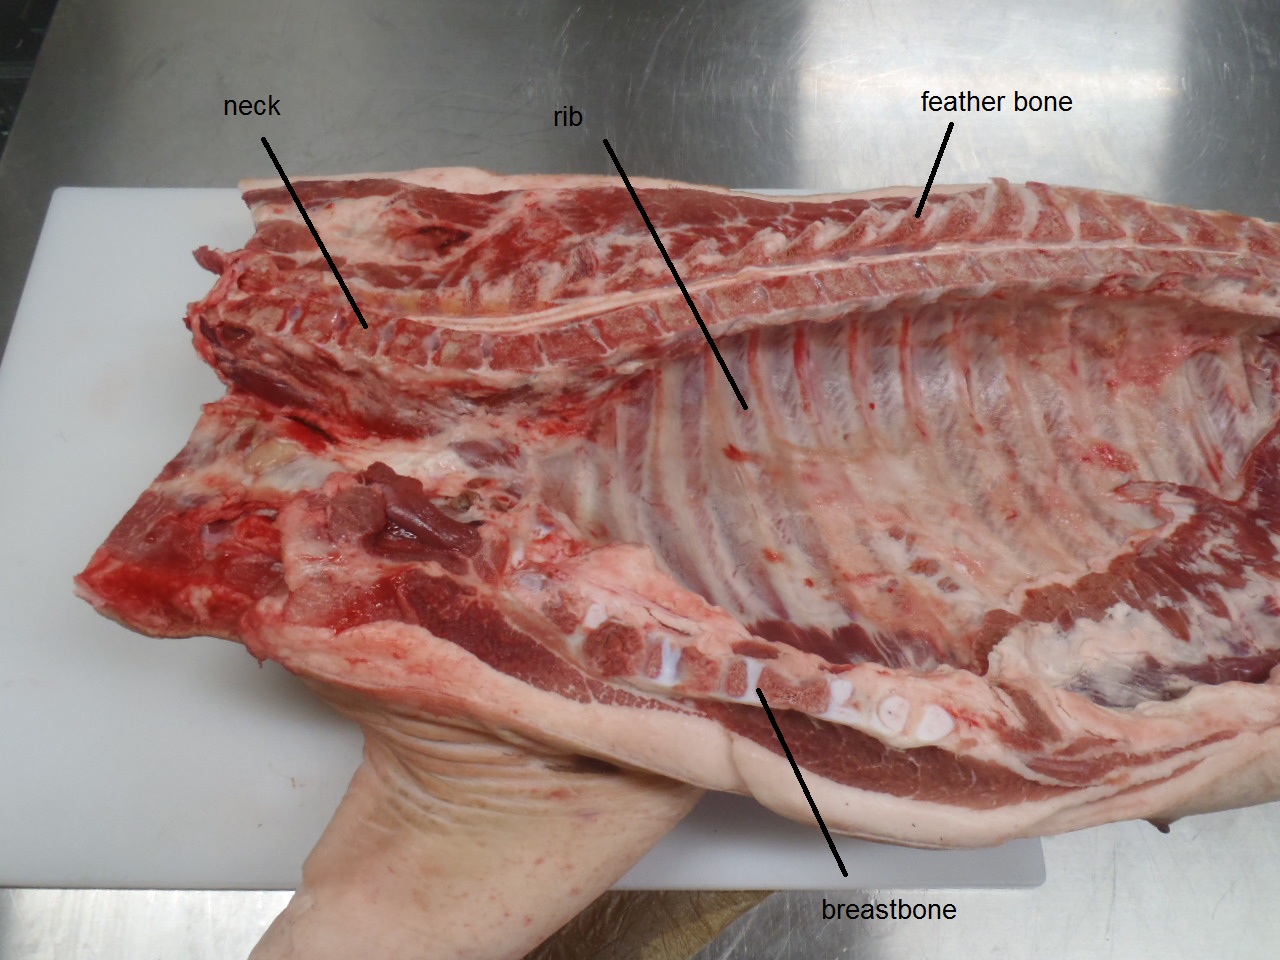 The front end of the pig, showing the neck bones, ribs, and breastbone